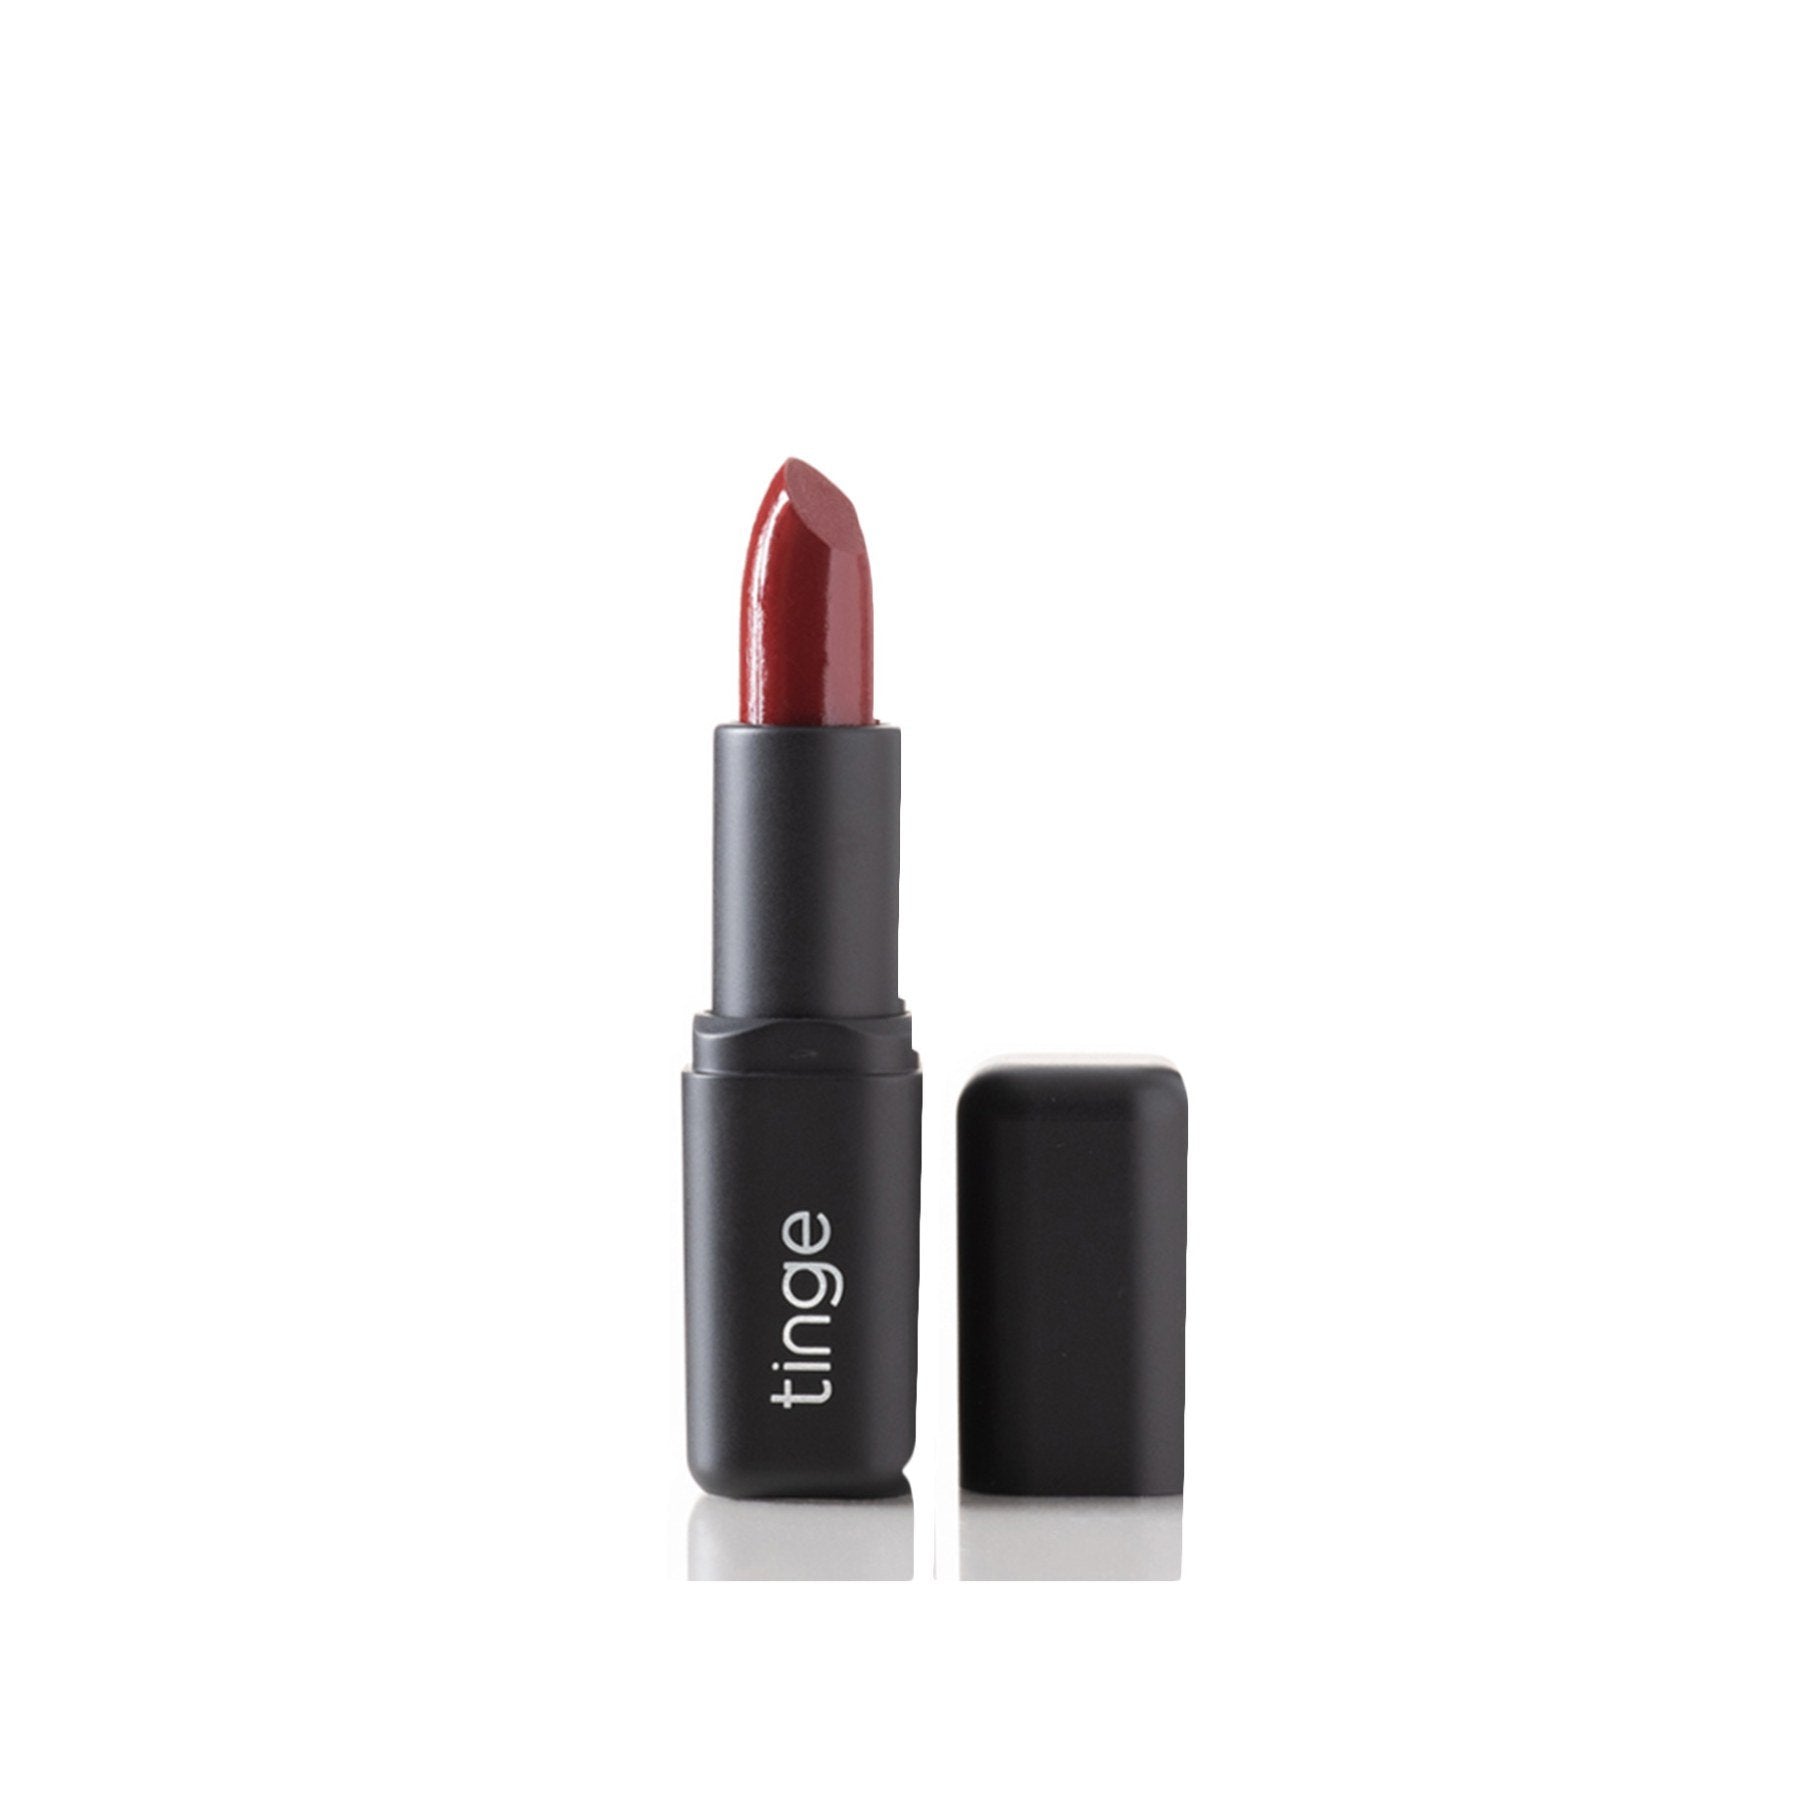 Shop Sahara-Cherry Maroon from Tinge on SublimeLife.in. Best for a very matte look.